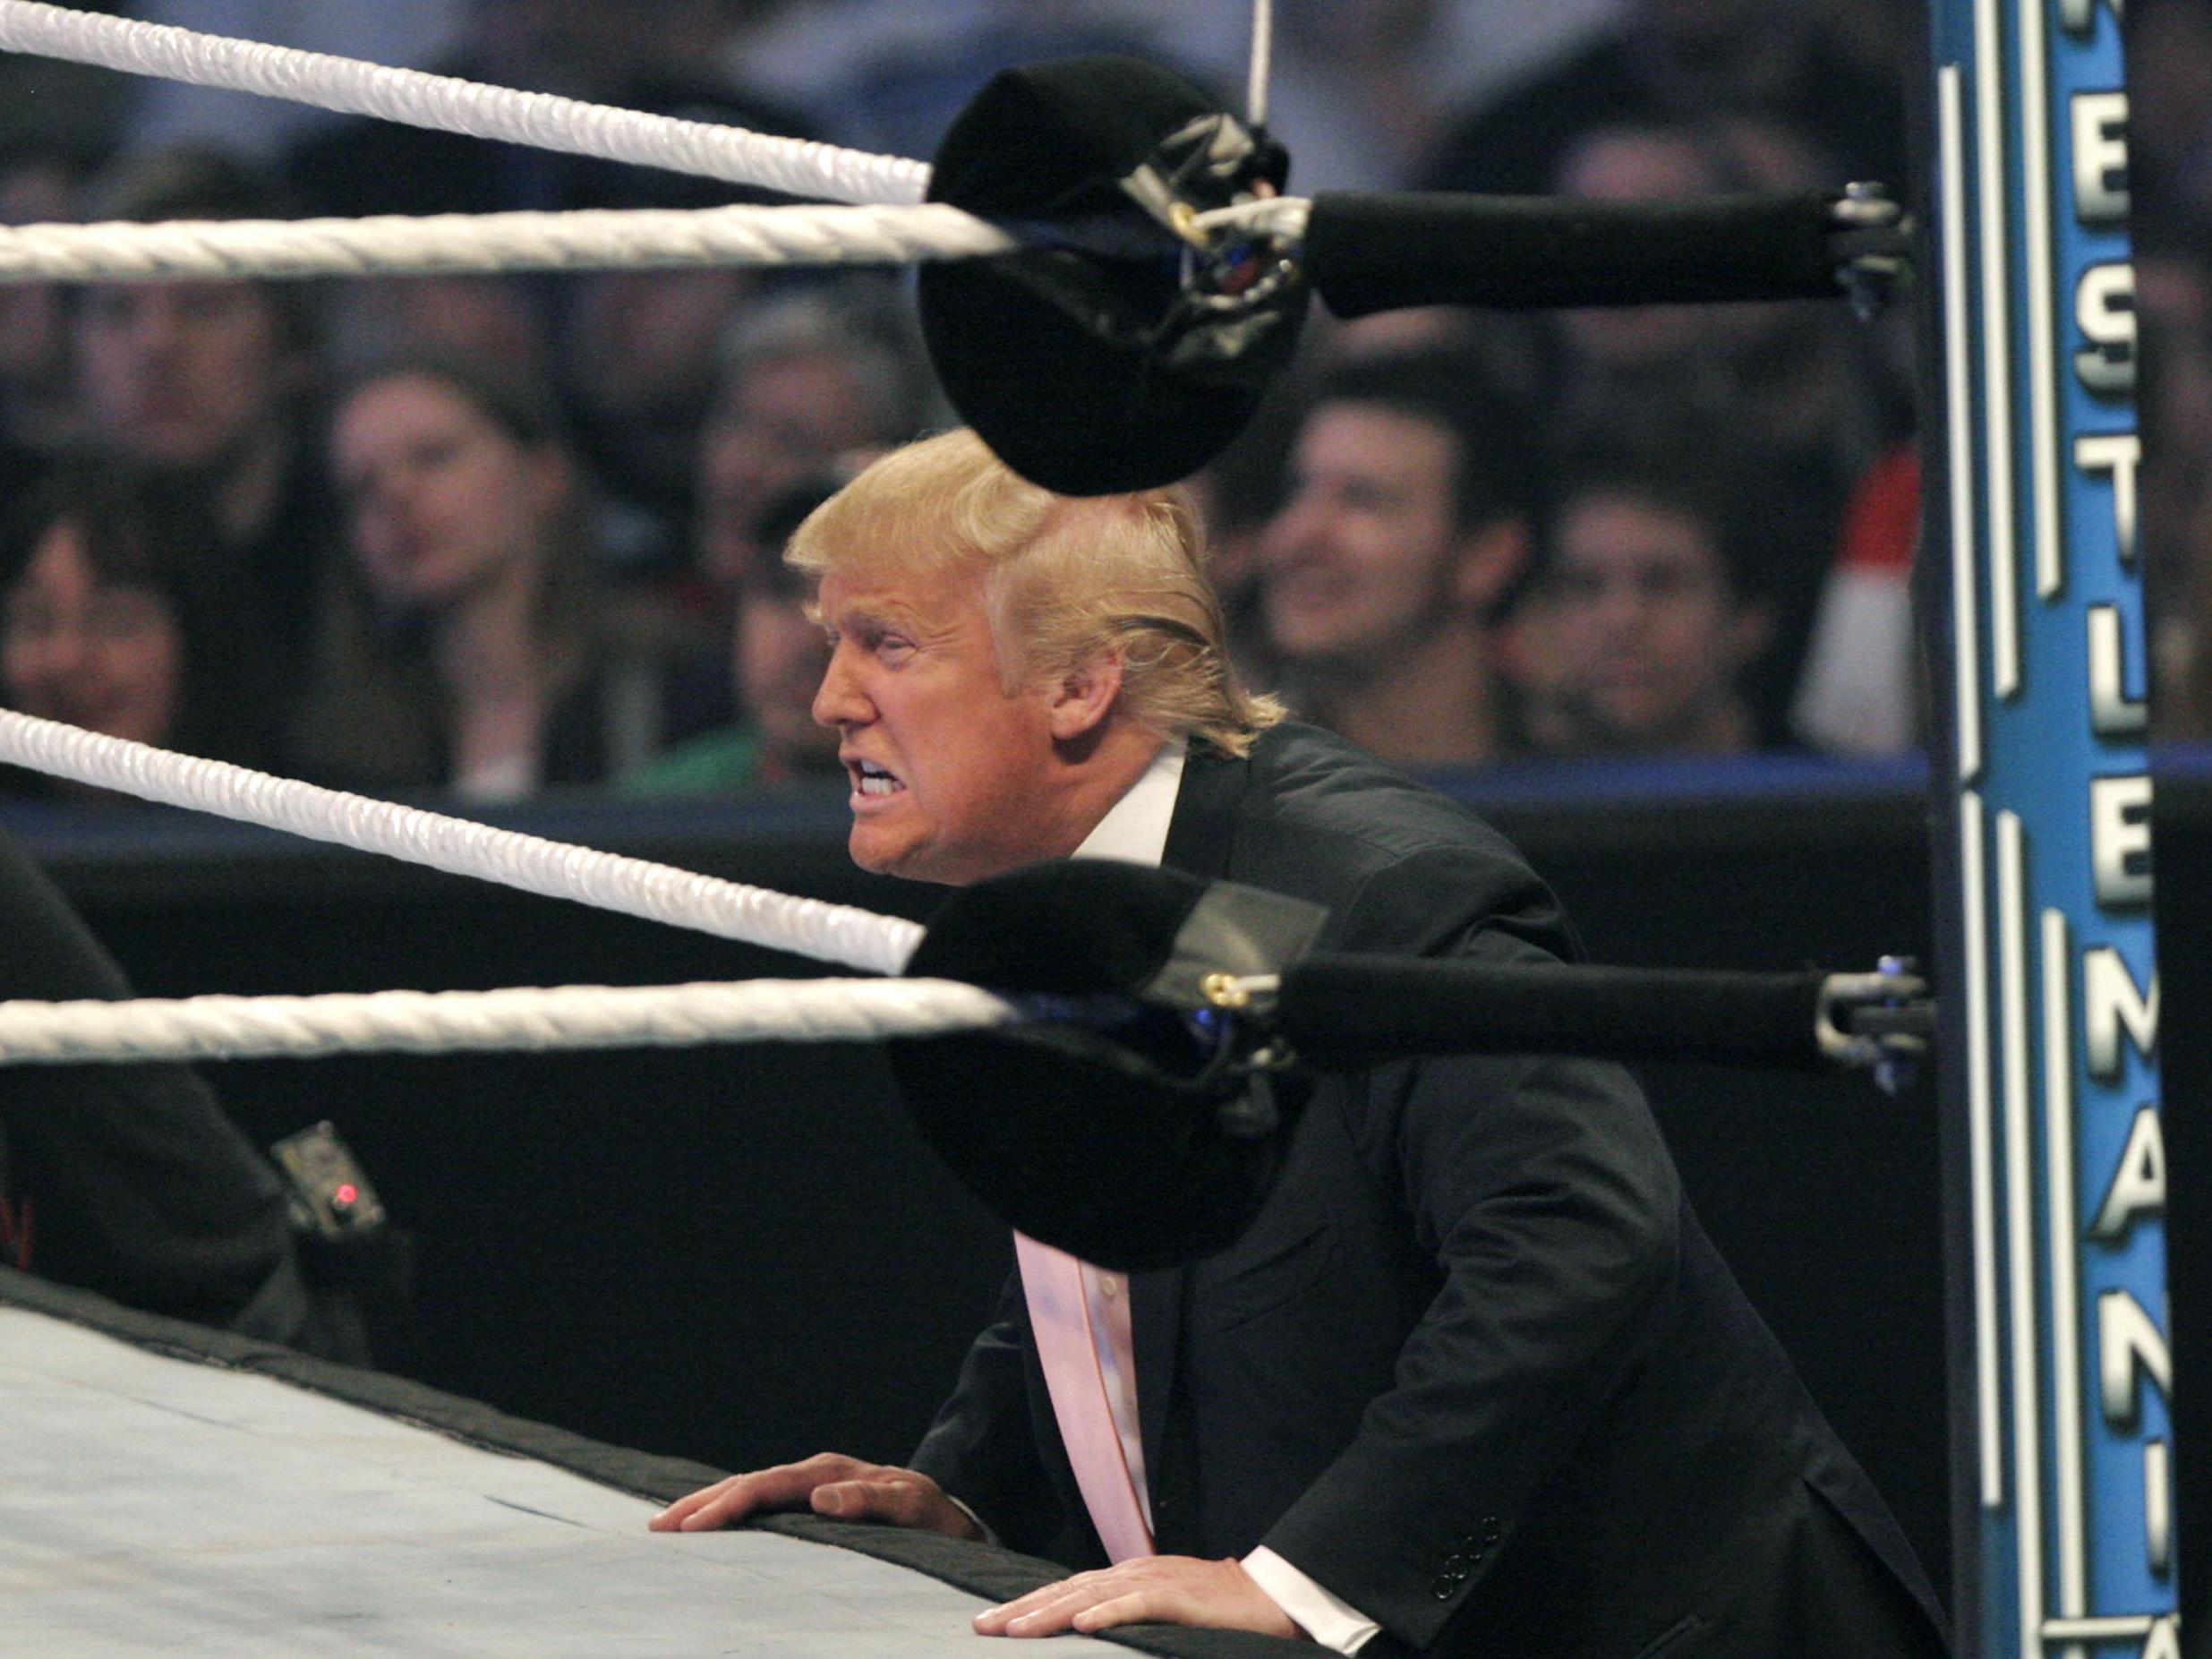 Donald Trump appeared at WWE WrestleMania 23 in 2007